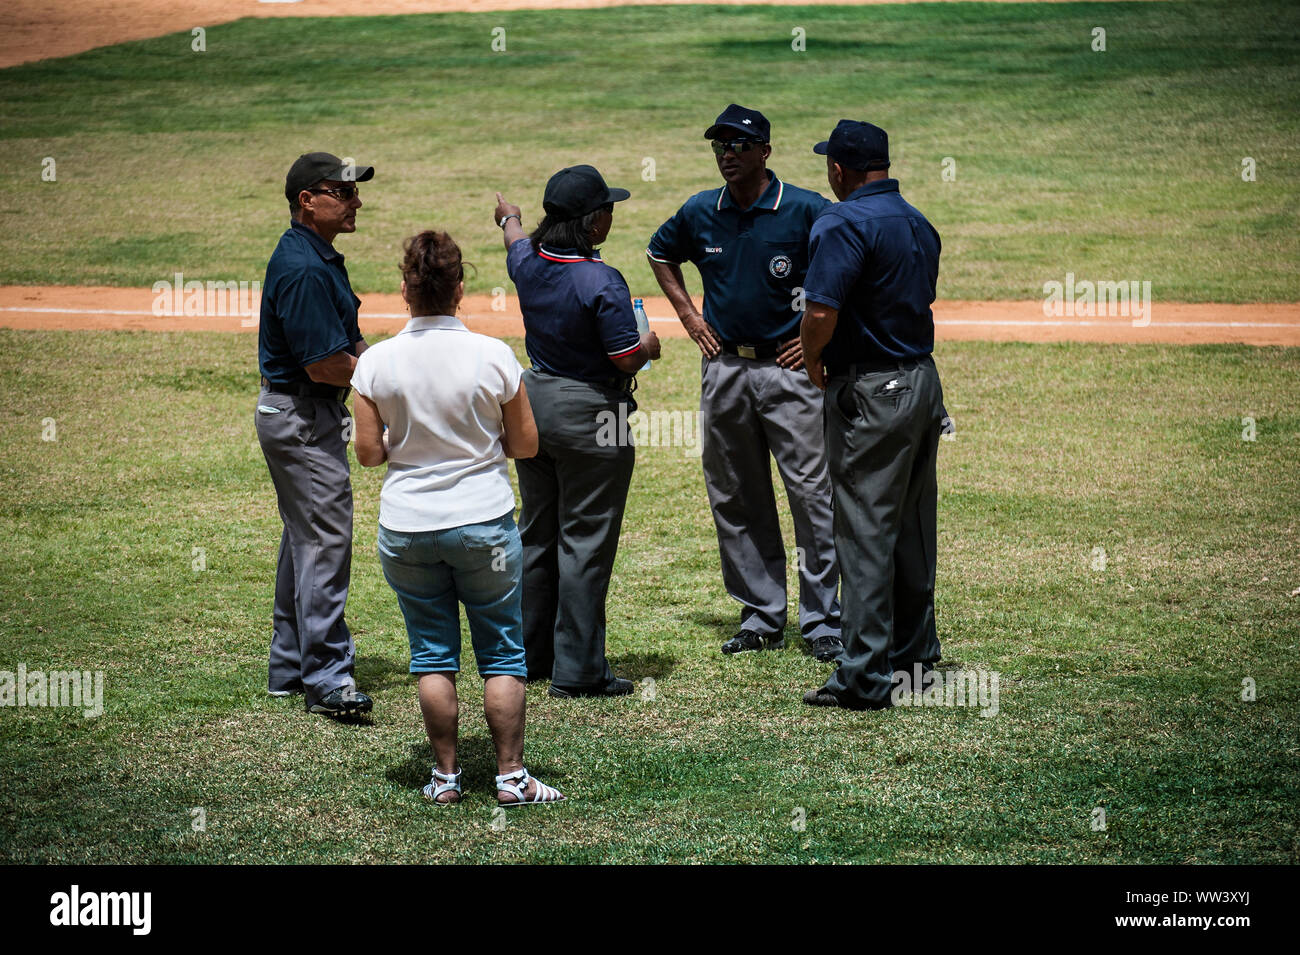 Umpires, one being female, gather on field during a baseball game in Havana, Cuba Stock Photo